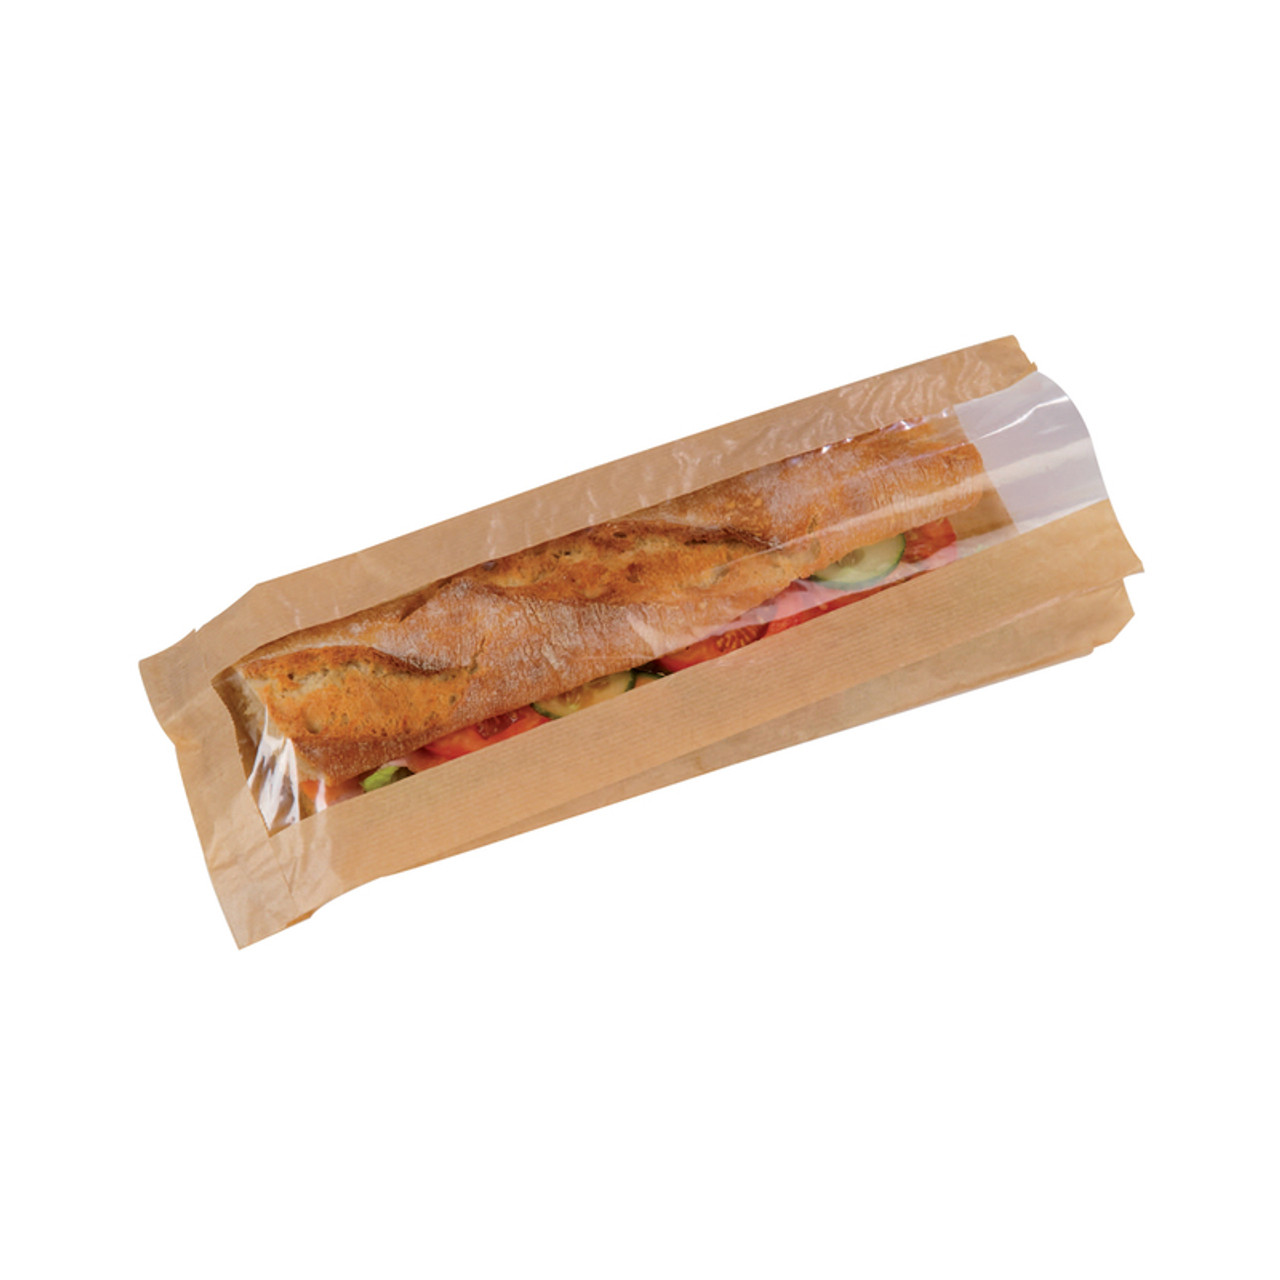 Order a Sample - Brown Sandwich Bag With Window L:13.8 x W:3.9 x H:1.6in